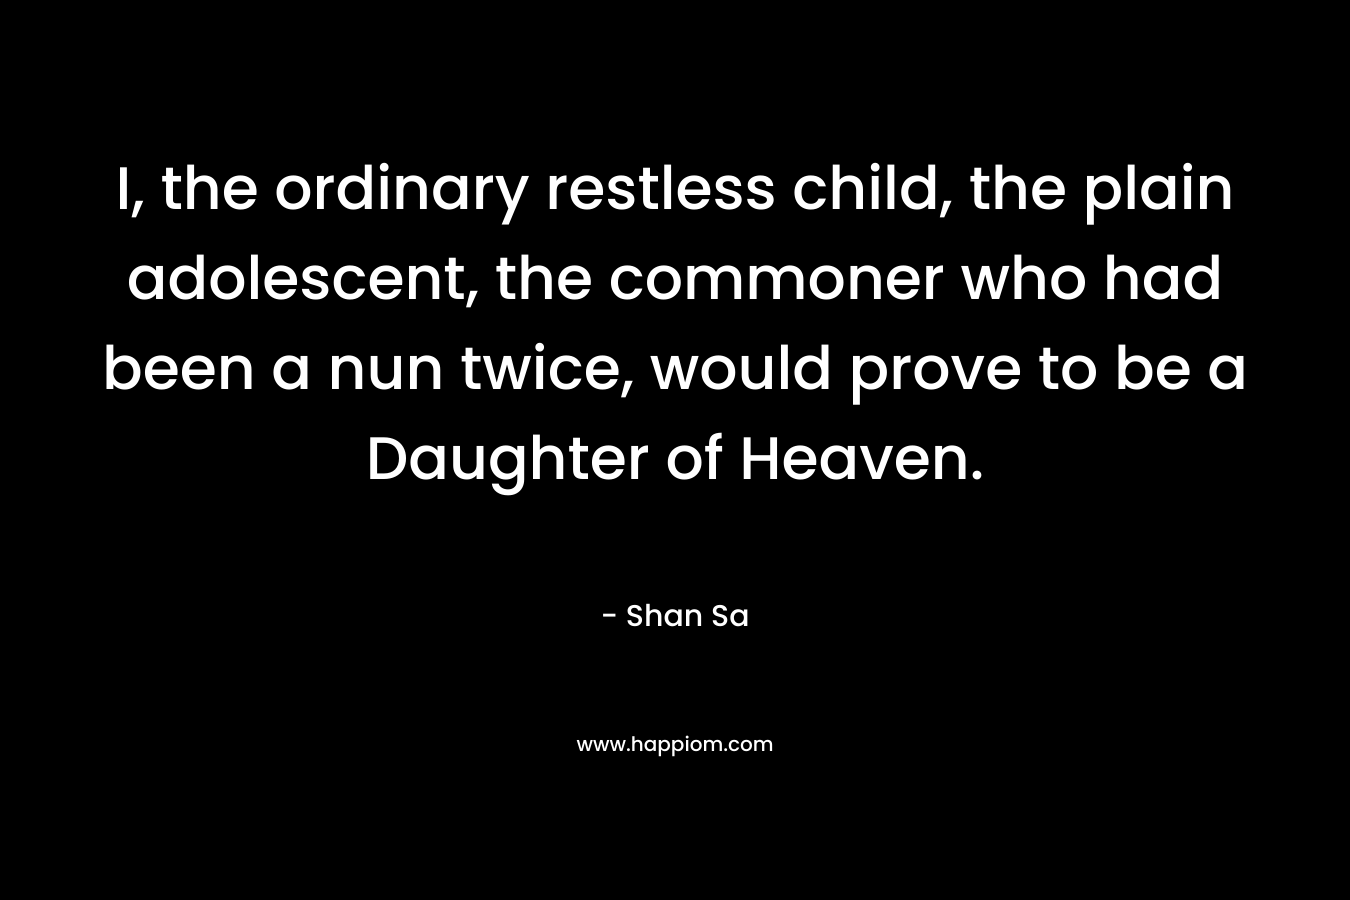 I, the ordinary restless child, the plain adolescent, the commoner who had been a nun twice, would prove to be a Daughter of Heaven. – Shan Sa